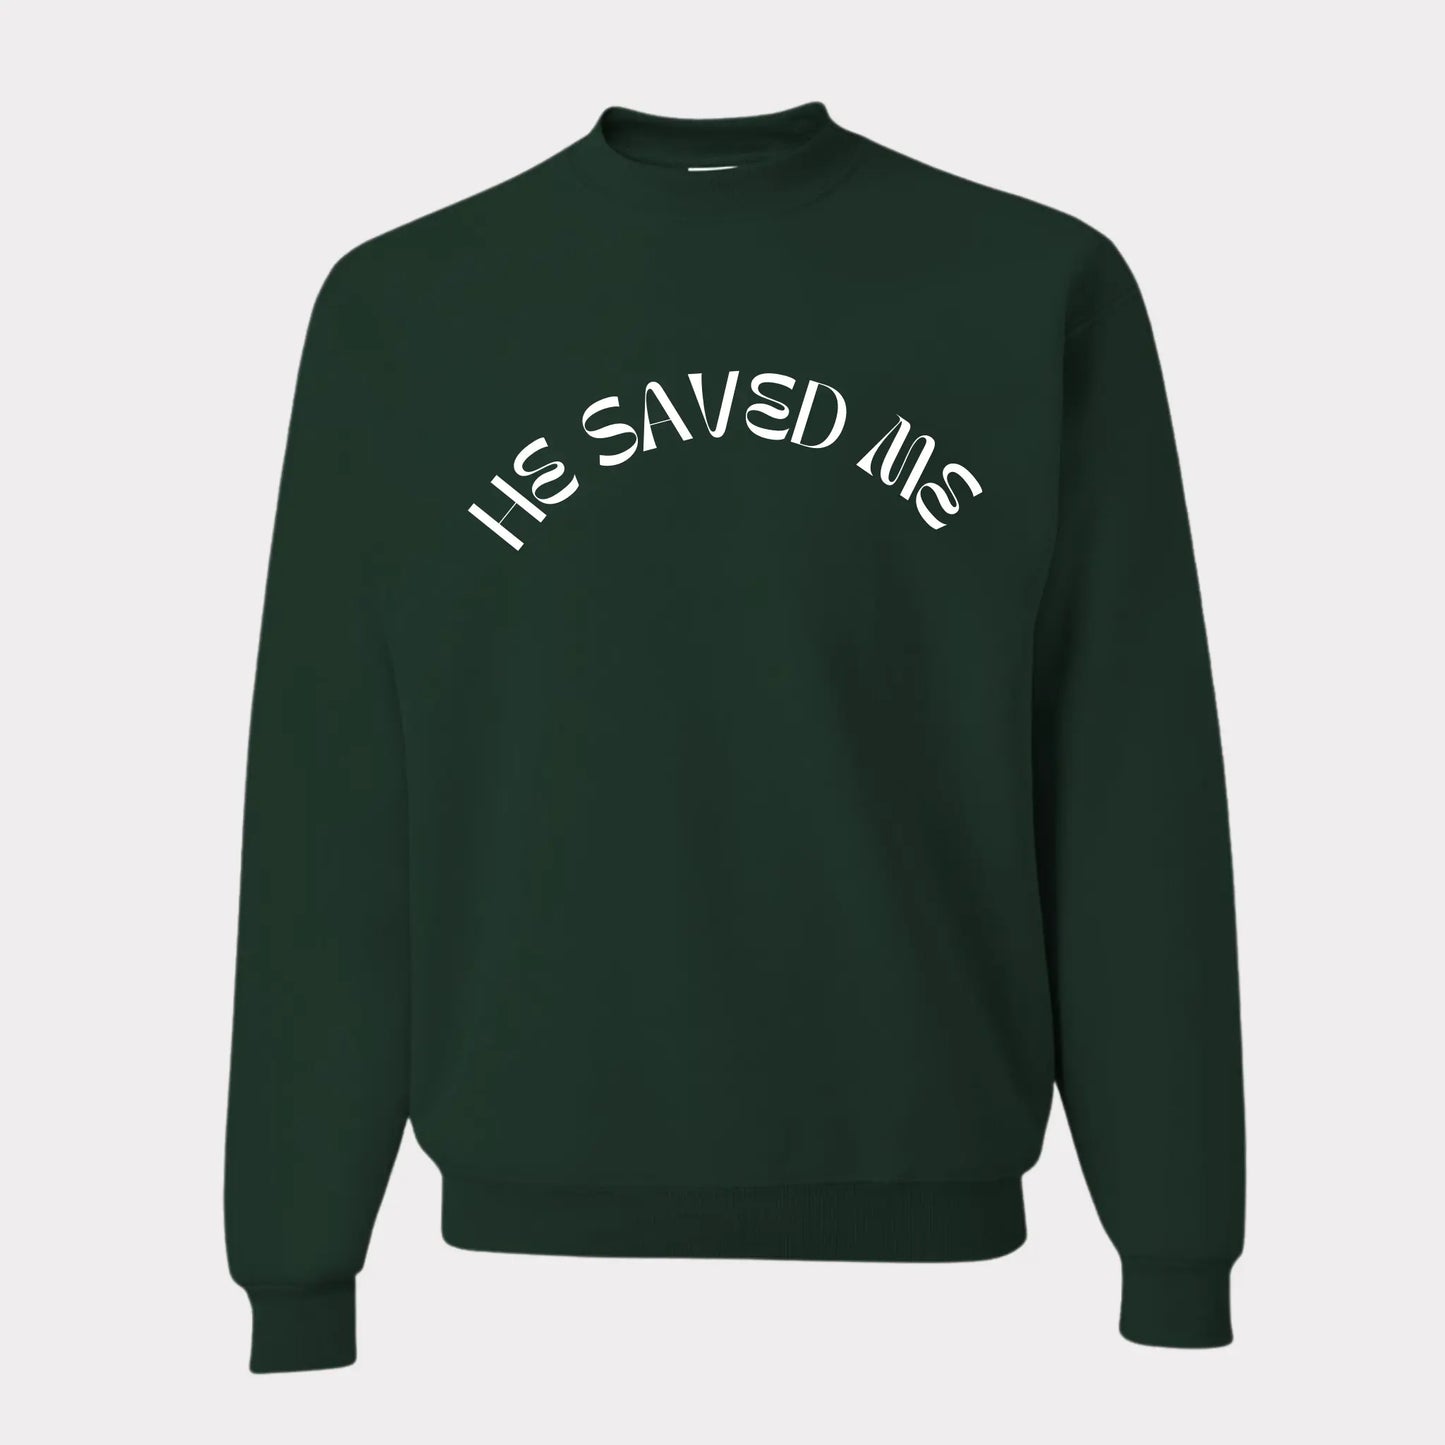 Forest Green premium crew neck sweatshirt. This sweatshirt reads "He Saved Me'" on the front  in white letters. The fit is comfy and thick. From Crown of Favor Forrest Green He saved me sweatshirt crewneck. He Saved Me sweatshirt. Christian clothing brand